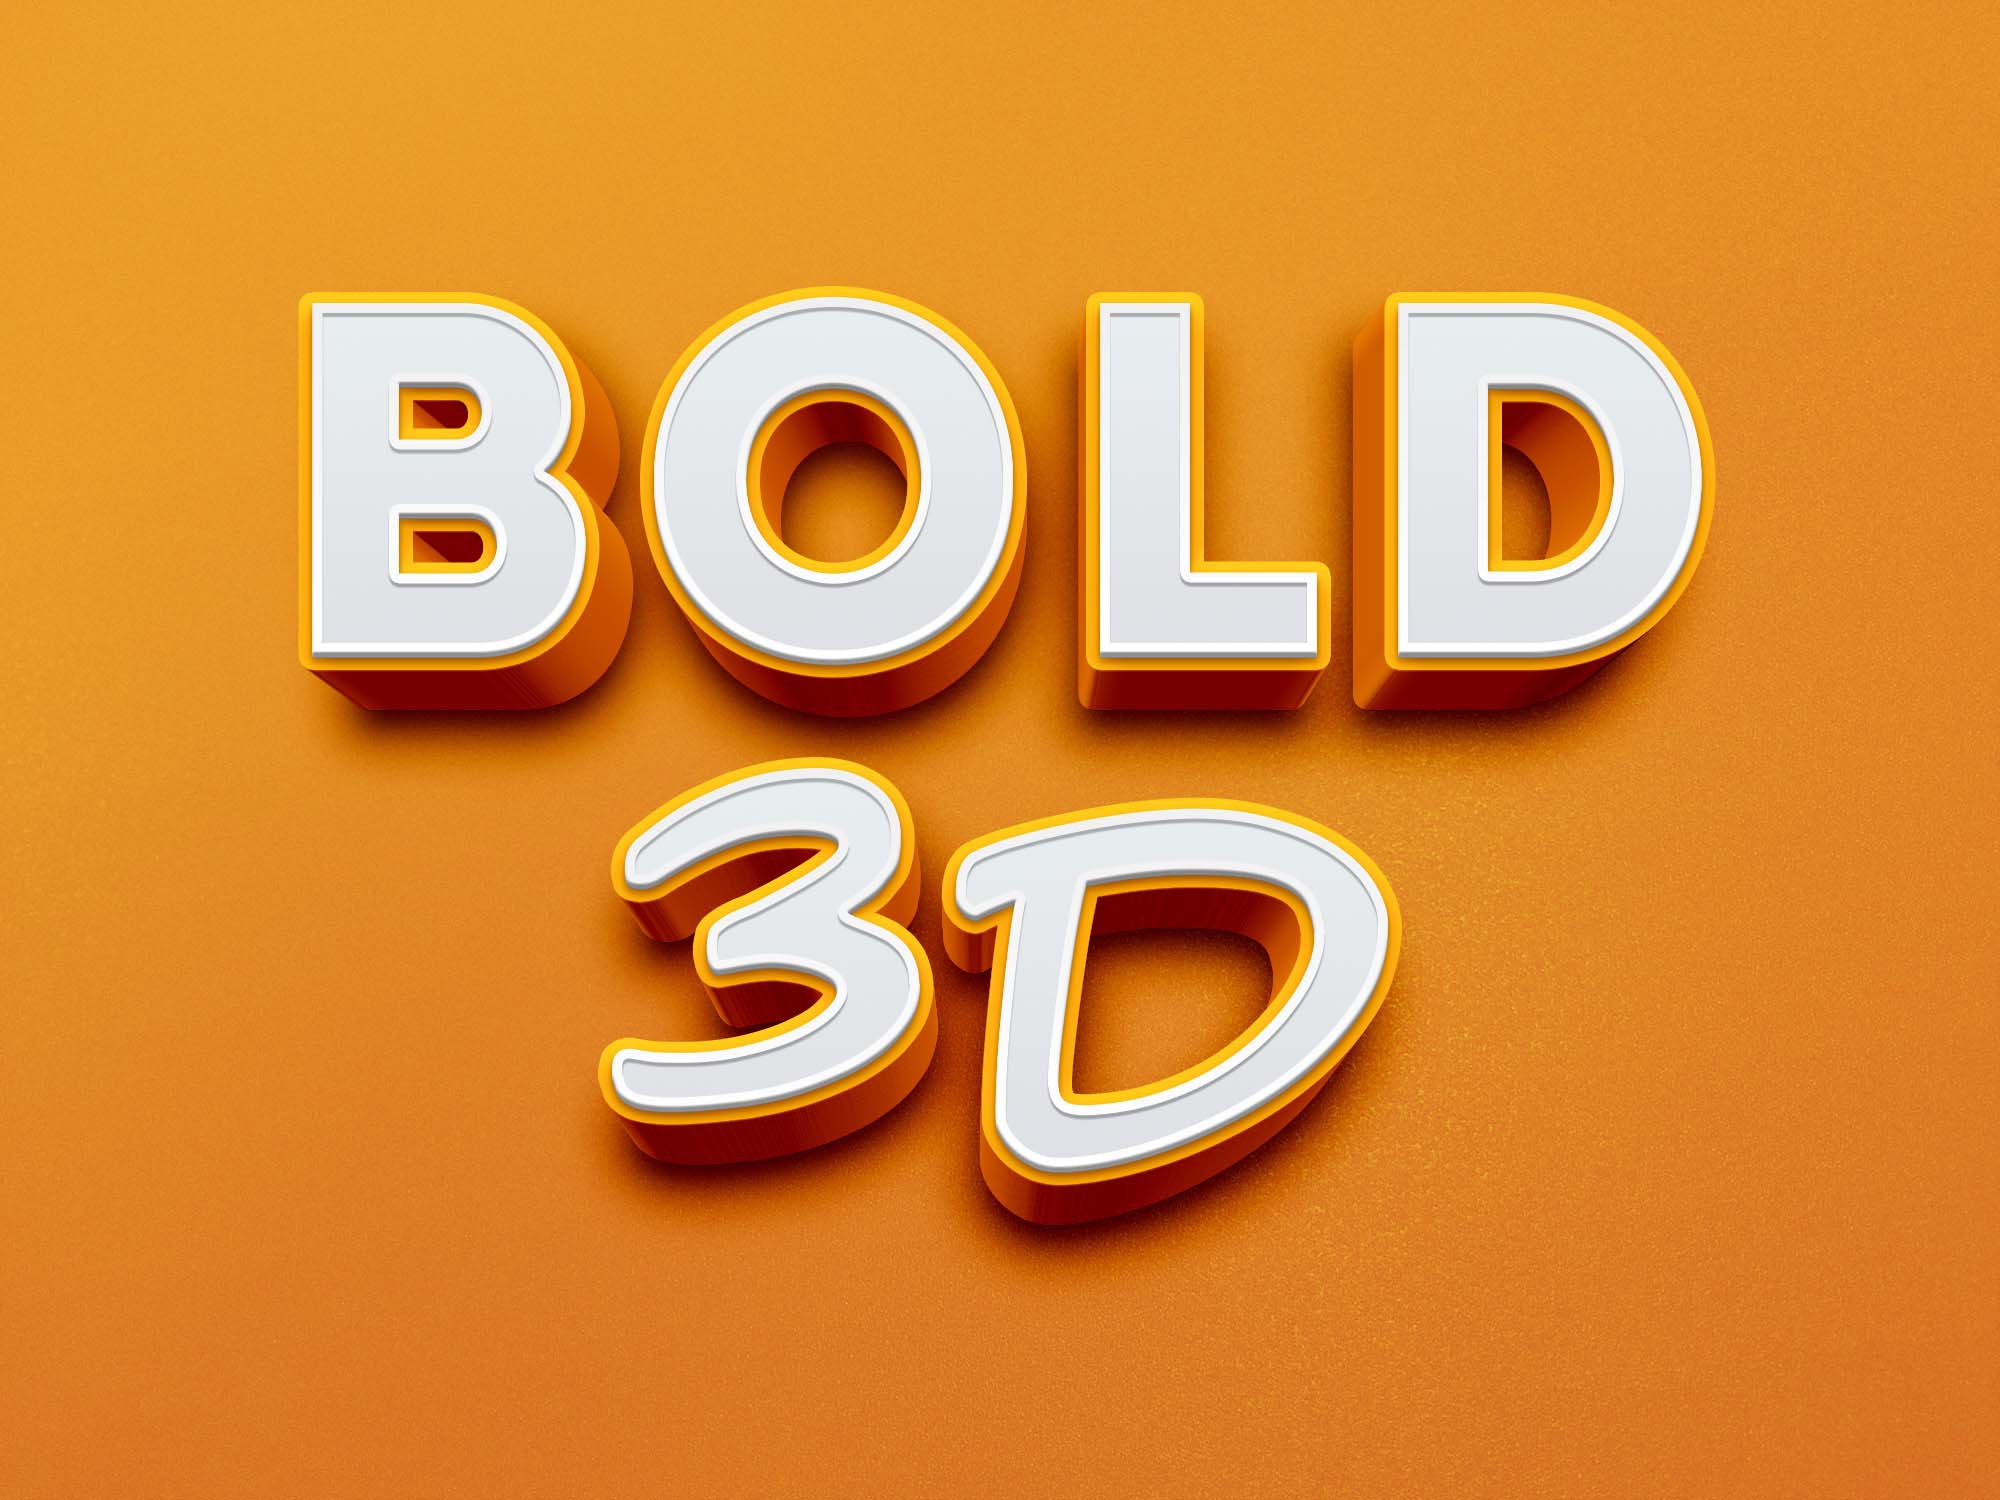 3d text style photoshop download